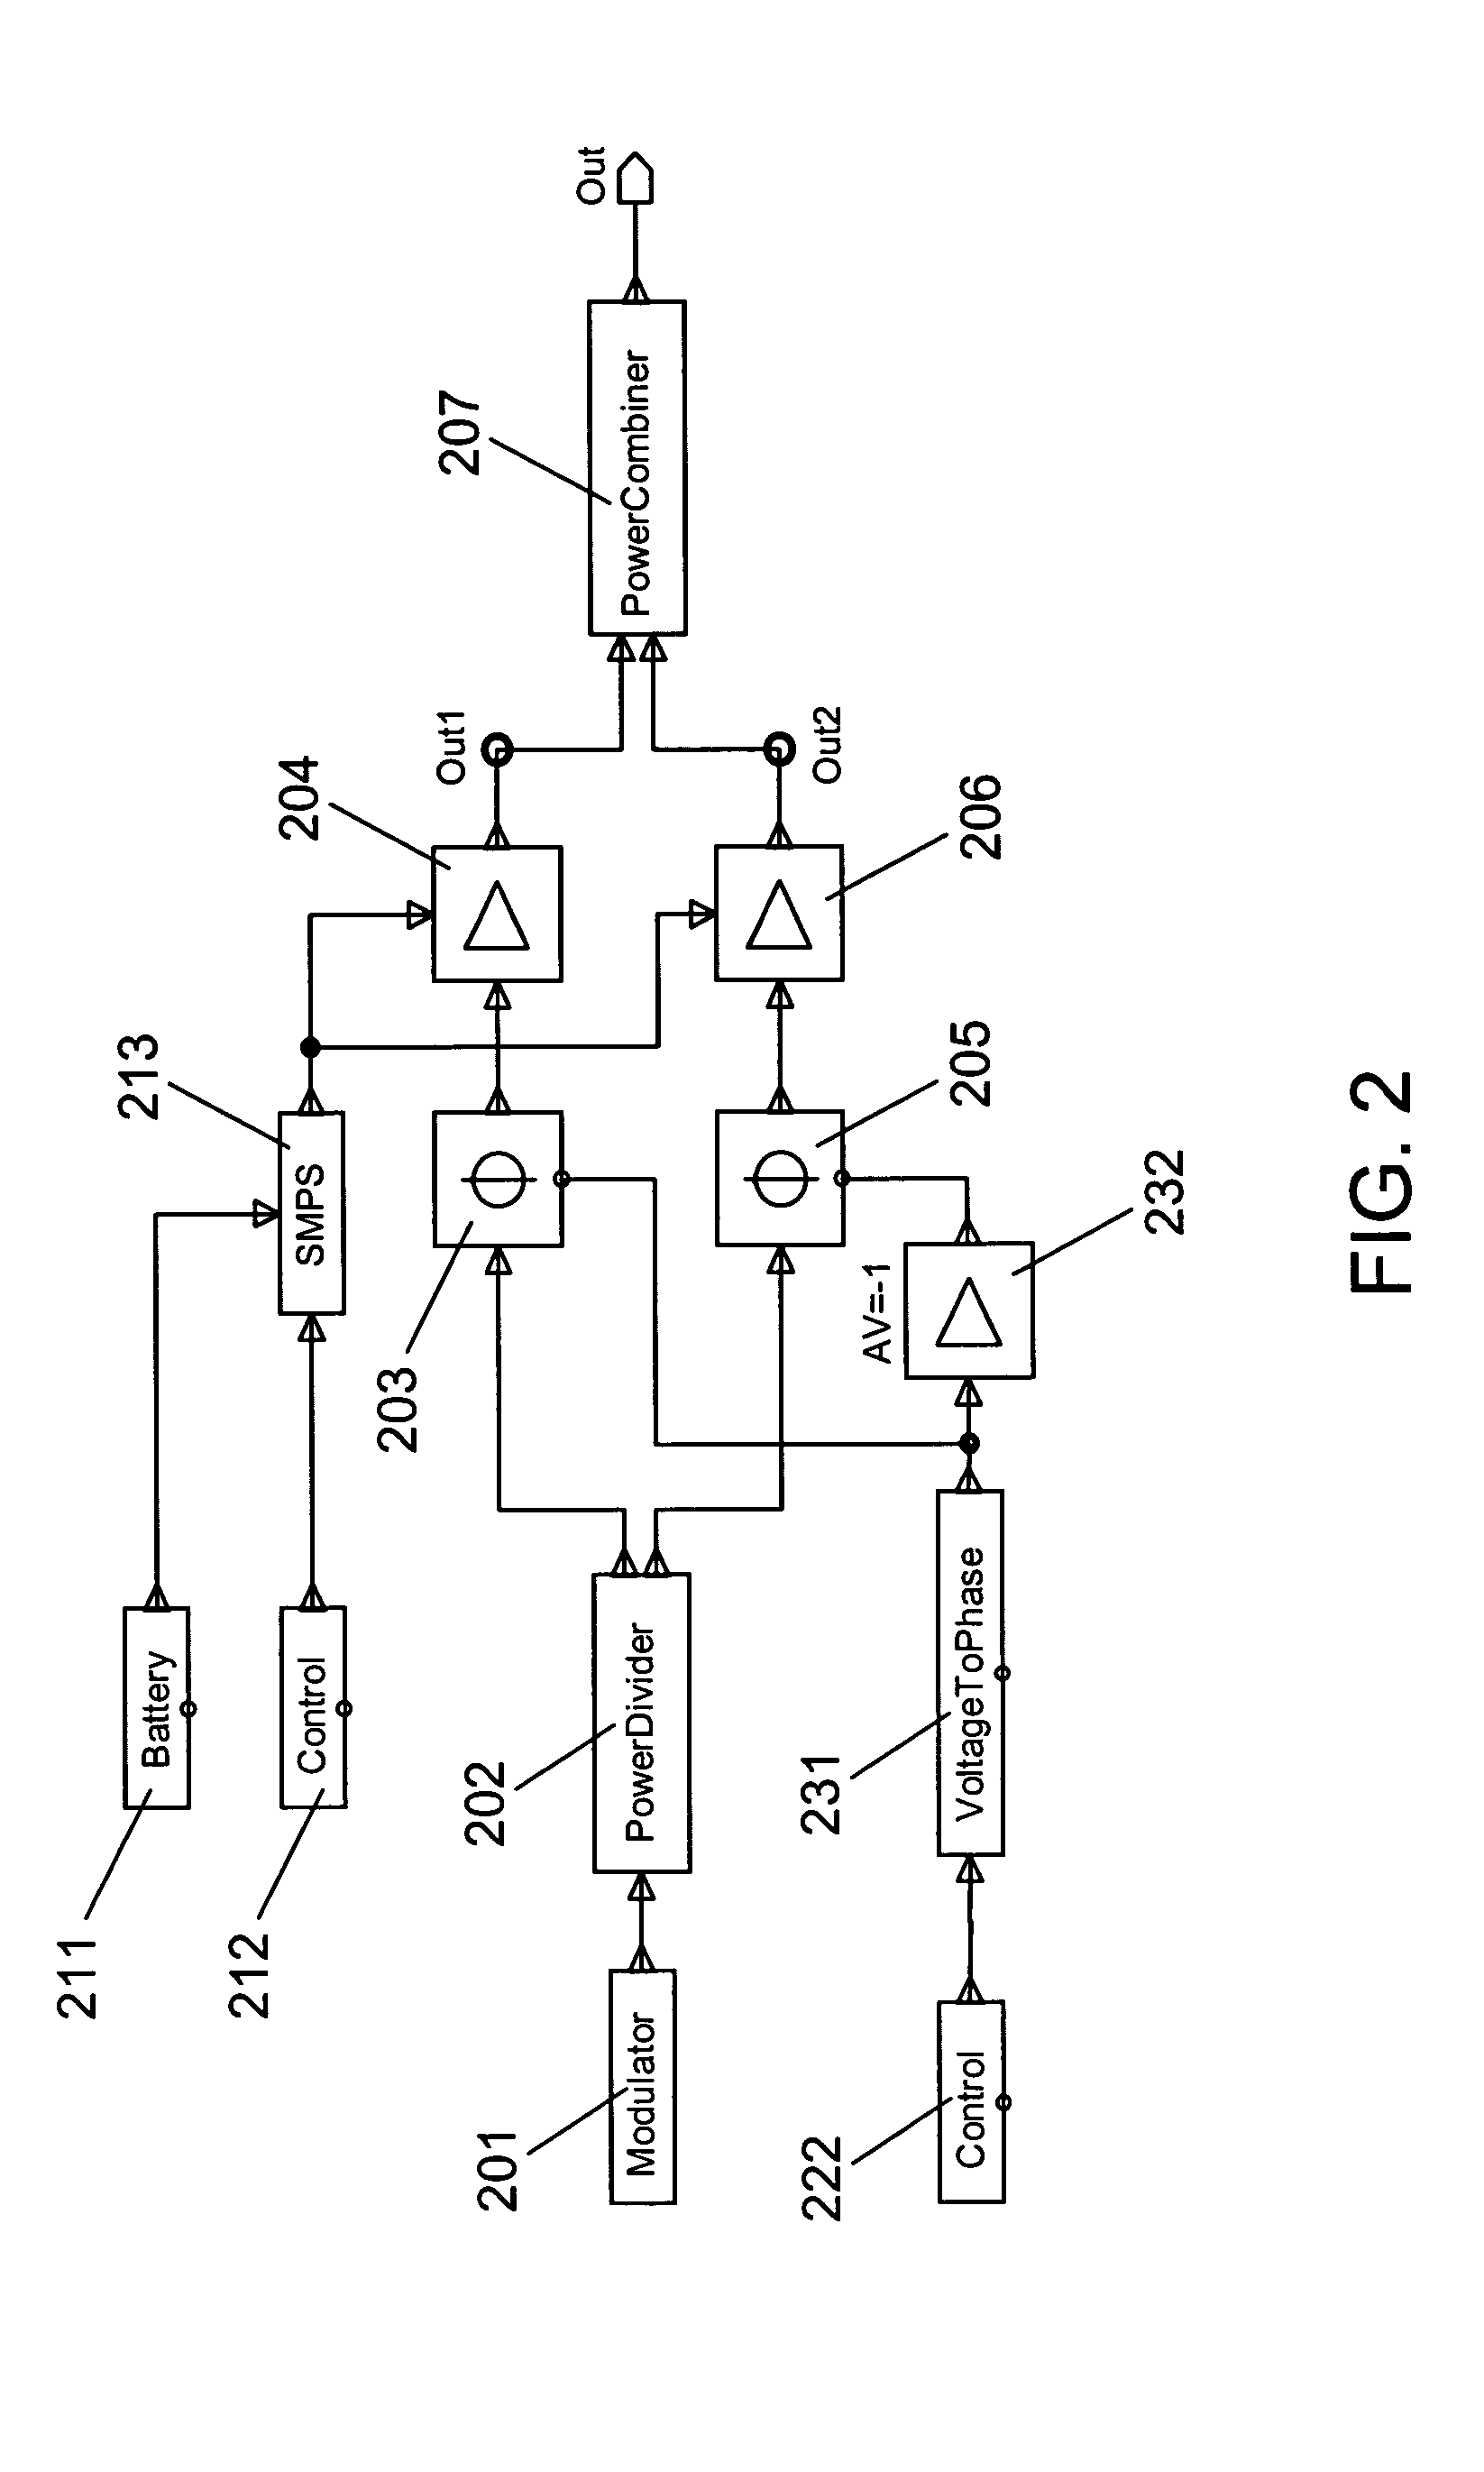 Power control for a transmitter